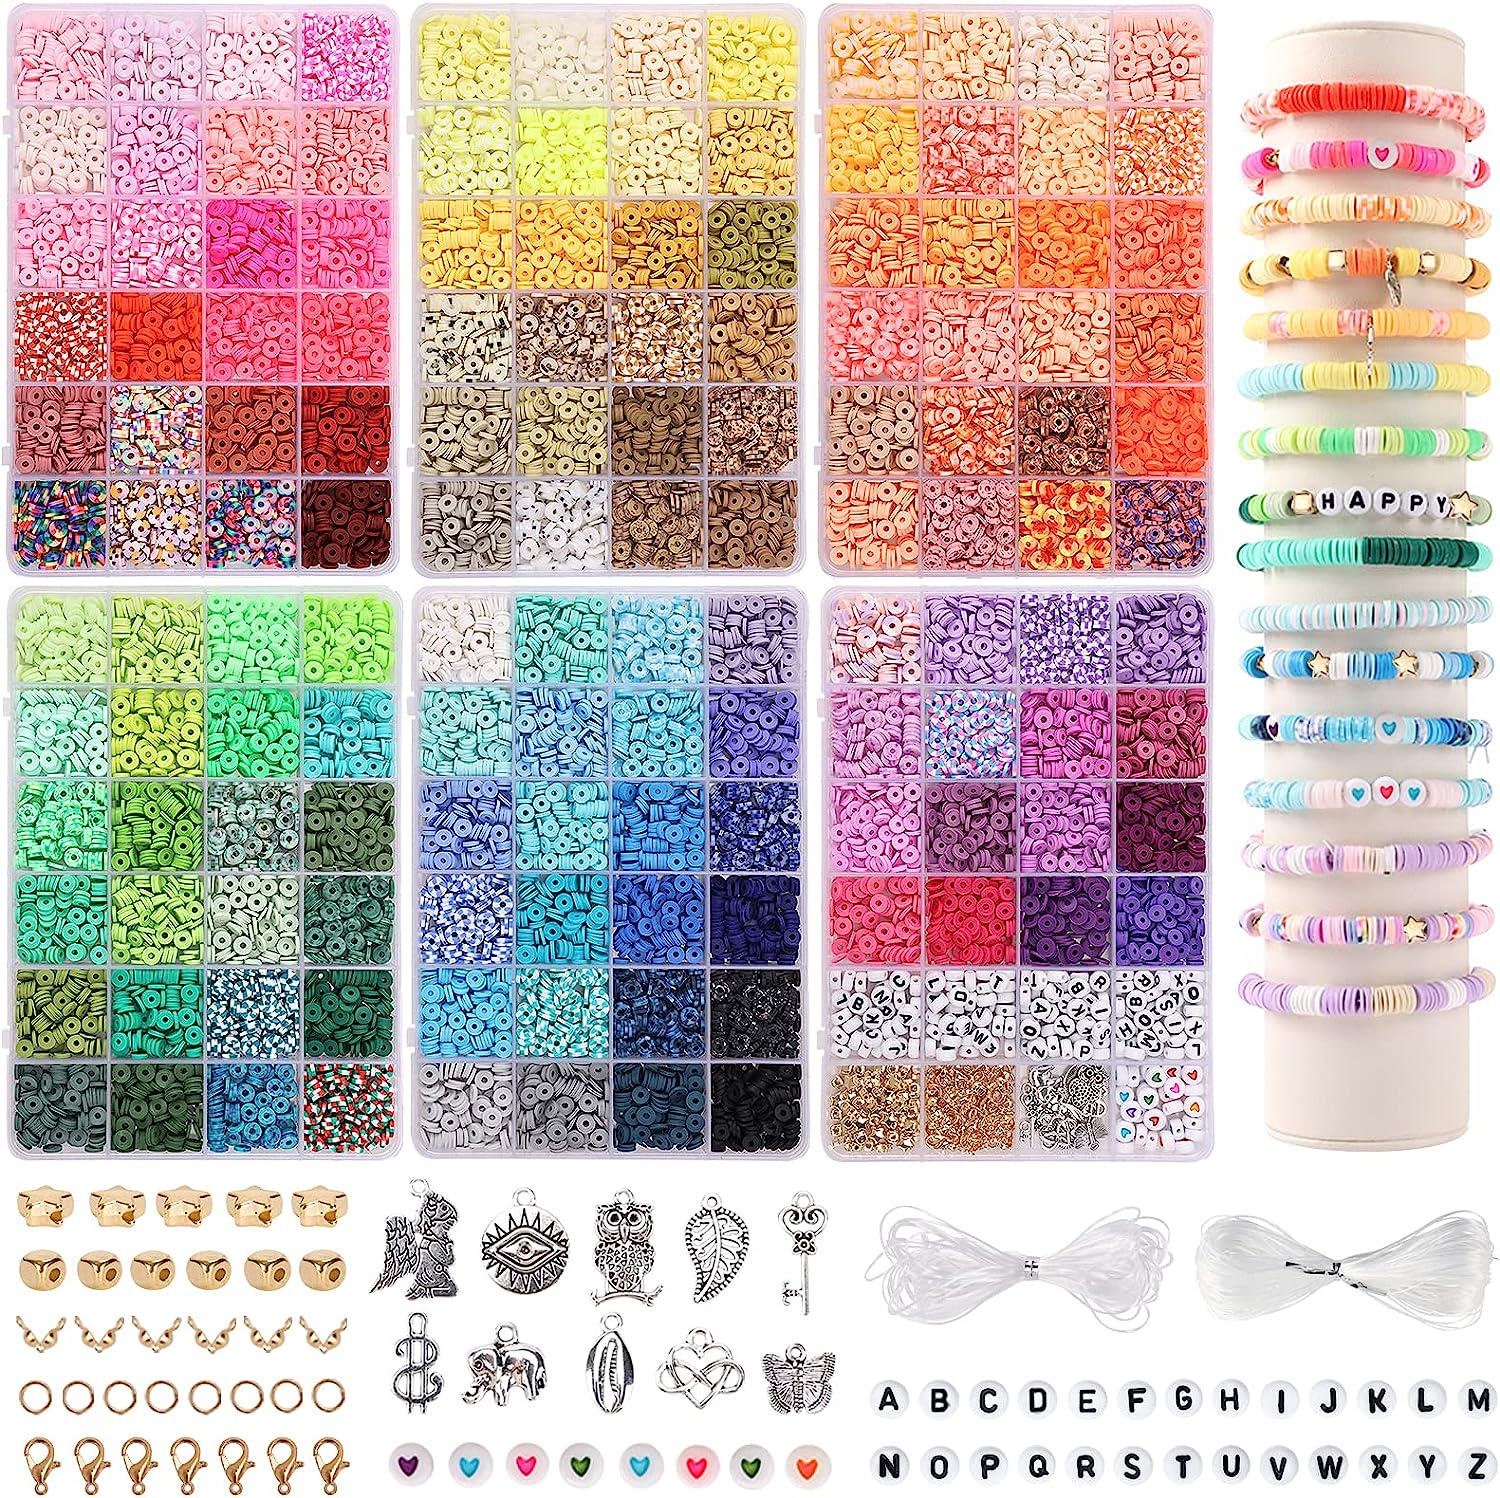  Clay Beads Bracelet Making Kit - 24 Colors, 7200 Beads,  Suitable for Adult Jewelry Making, Girls' Bracelets, Necklaces, DIY Arts  and Crafts Gifts